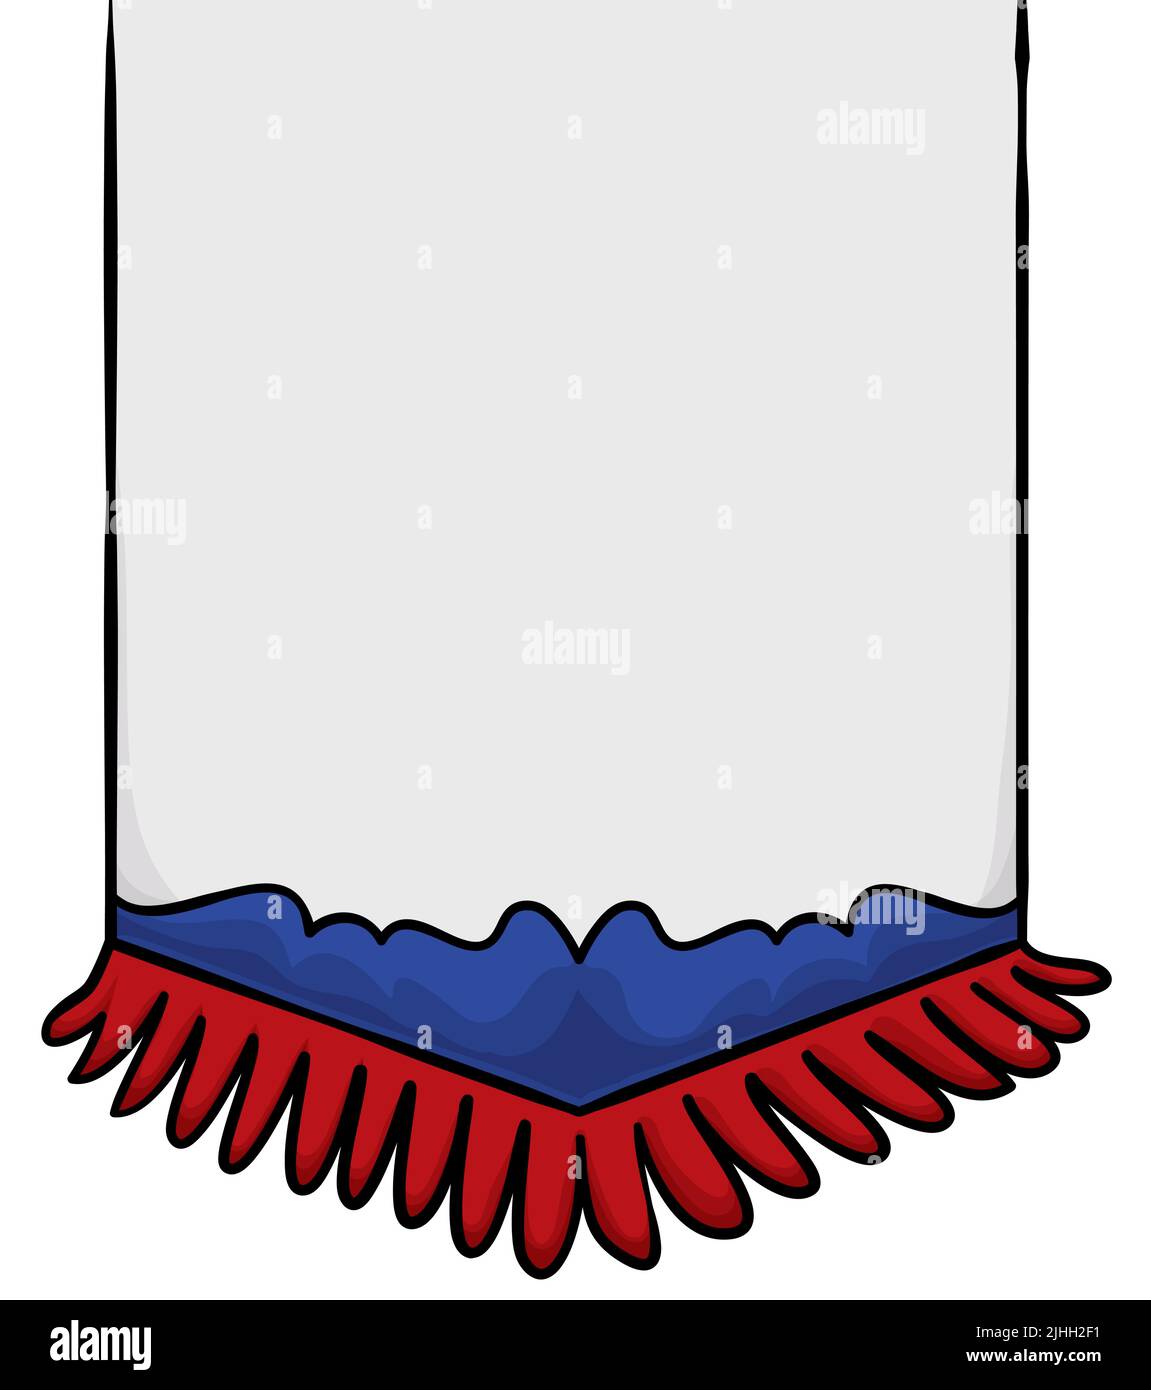 Vertical pennant or banner with empty and white space, decorated with blue and red fringes resembling Russian colors. Design in cartoon style with out Stock Vector